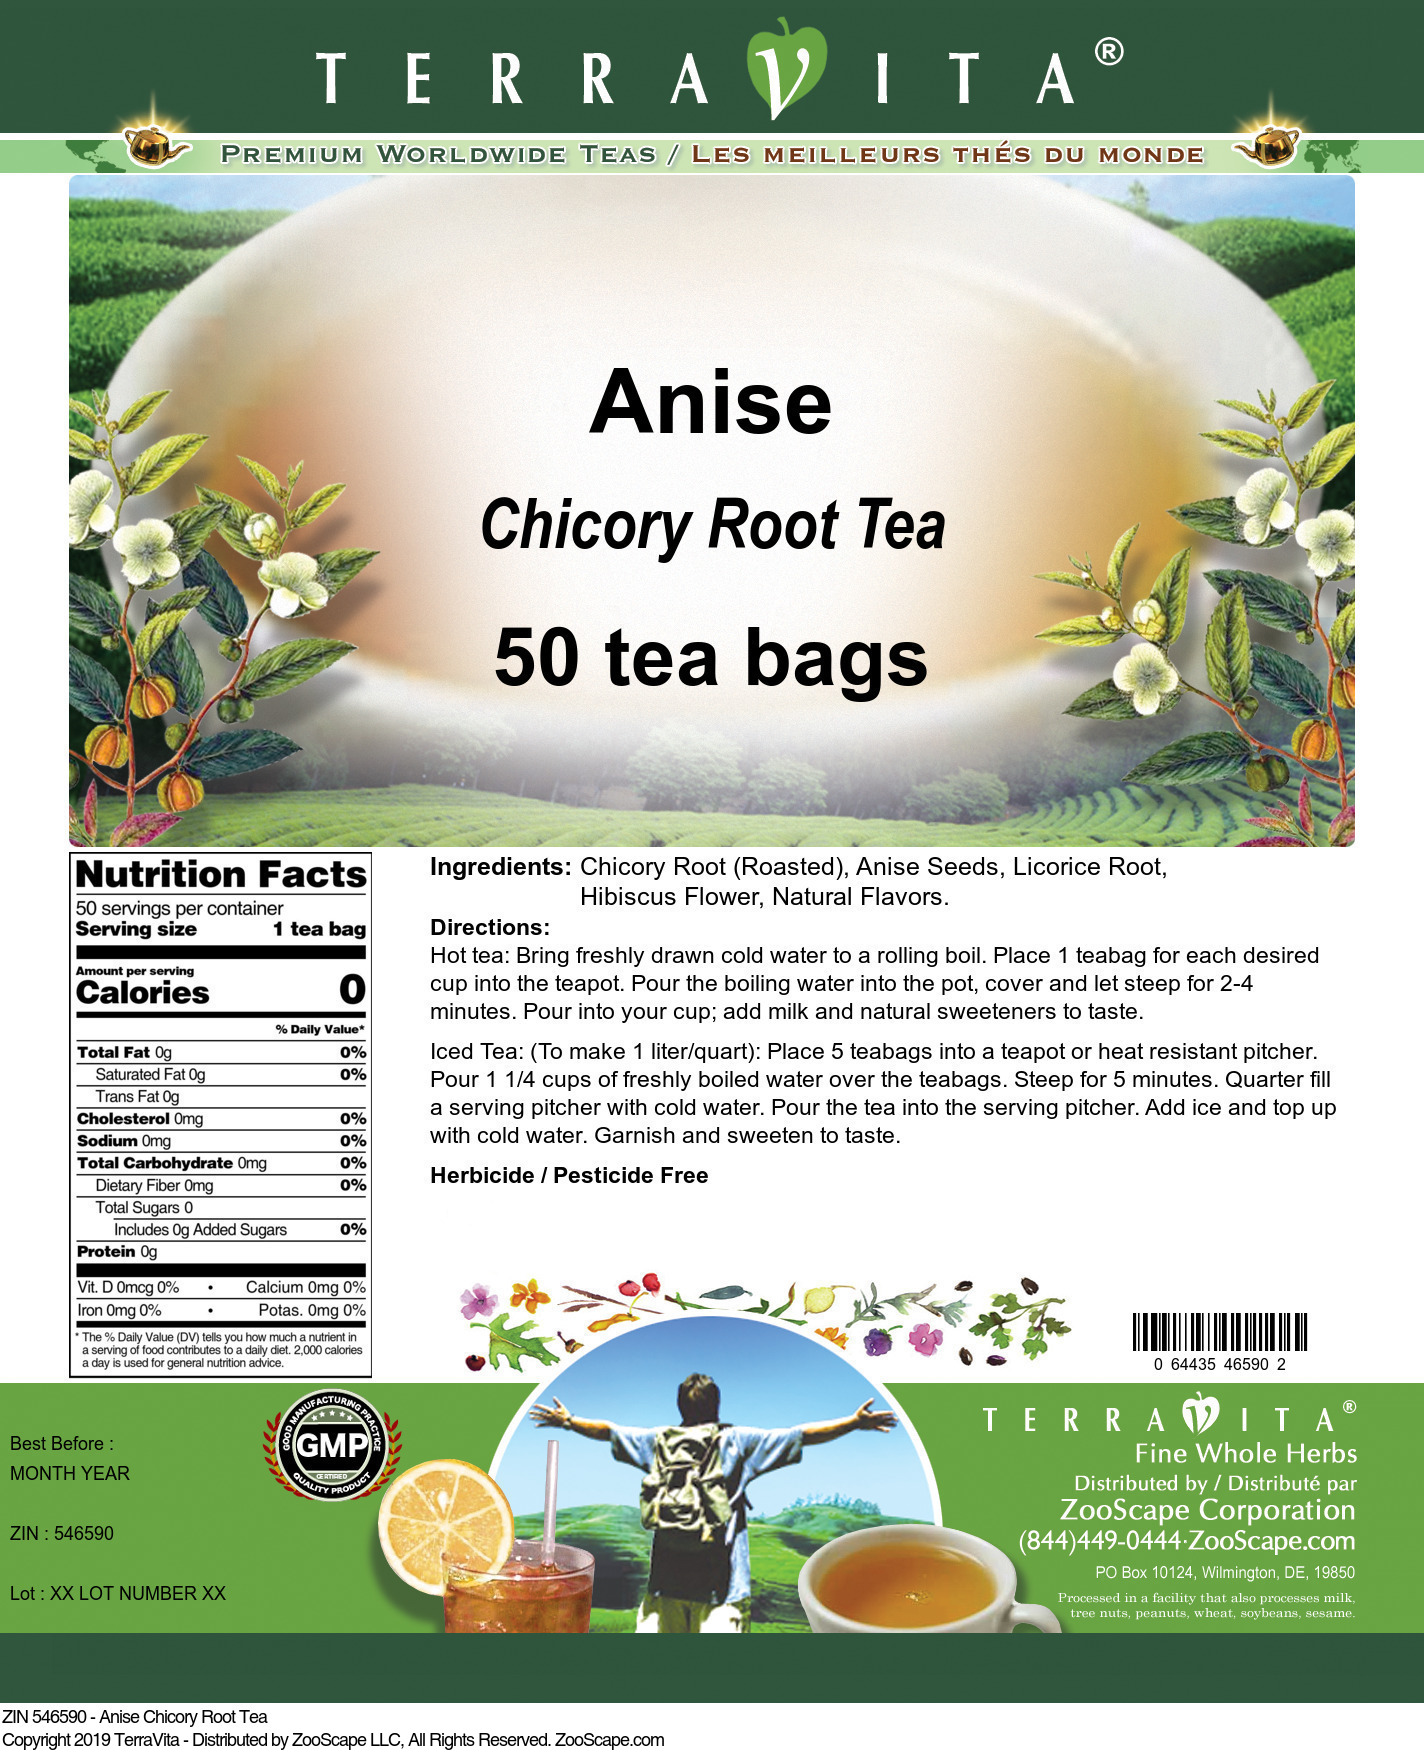 Anise Chicory Root Tea - Label